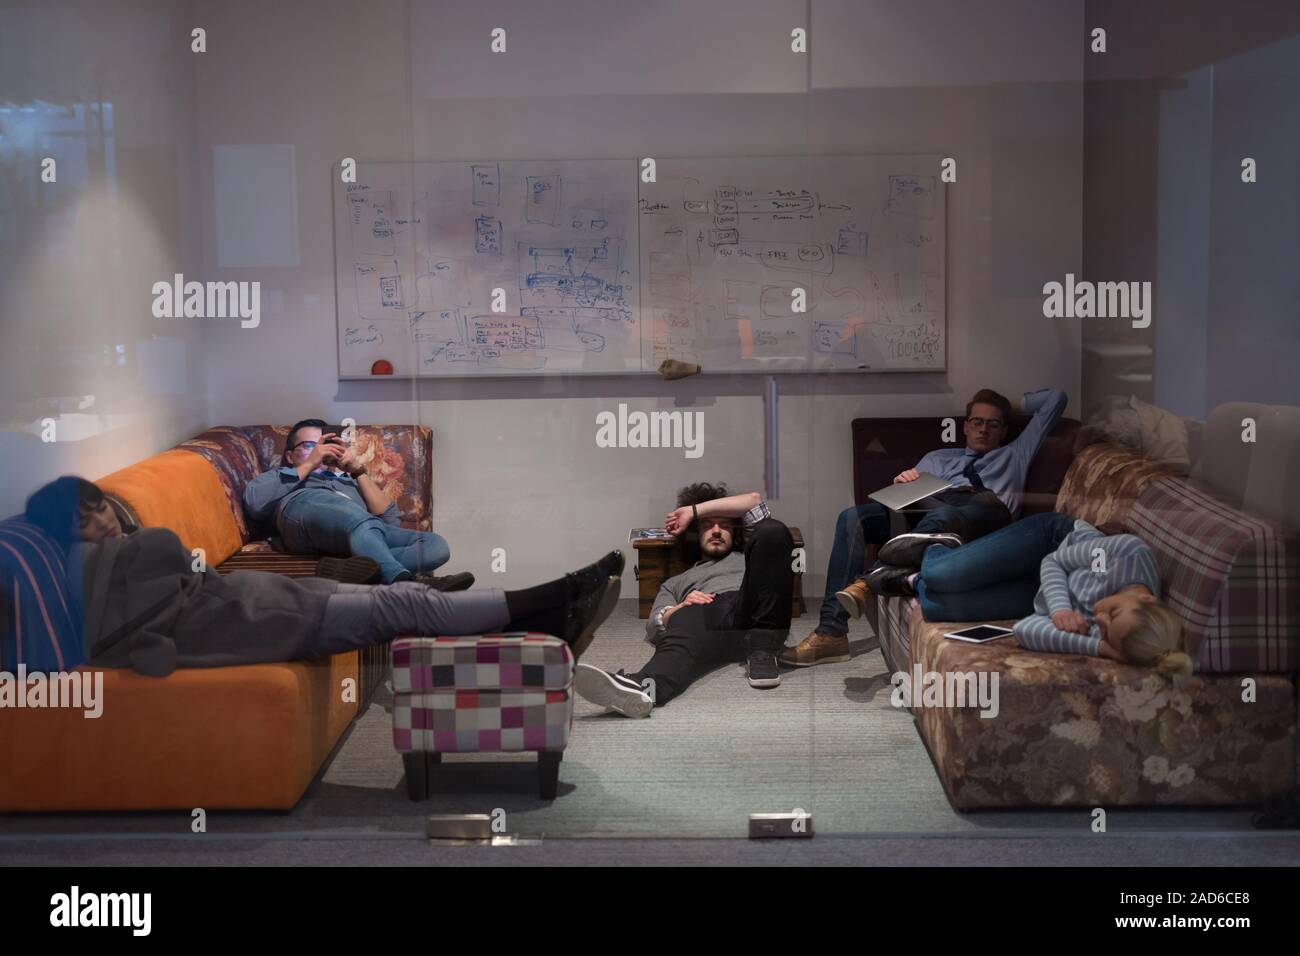 software developers sleeping on sofa in creative startup office Stock Photo